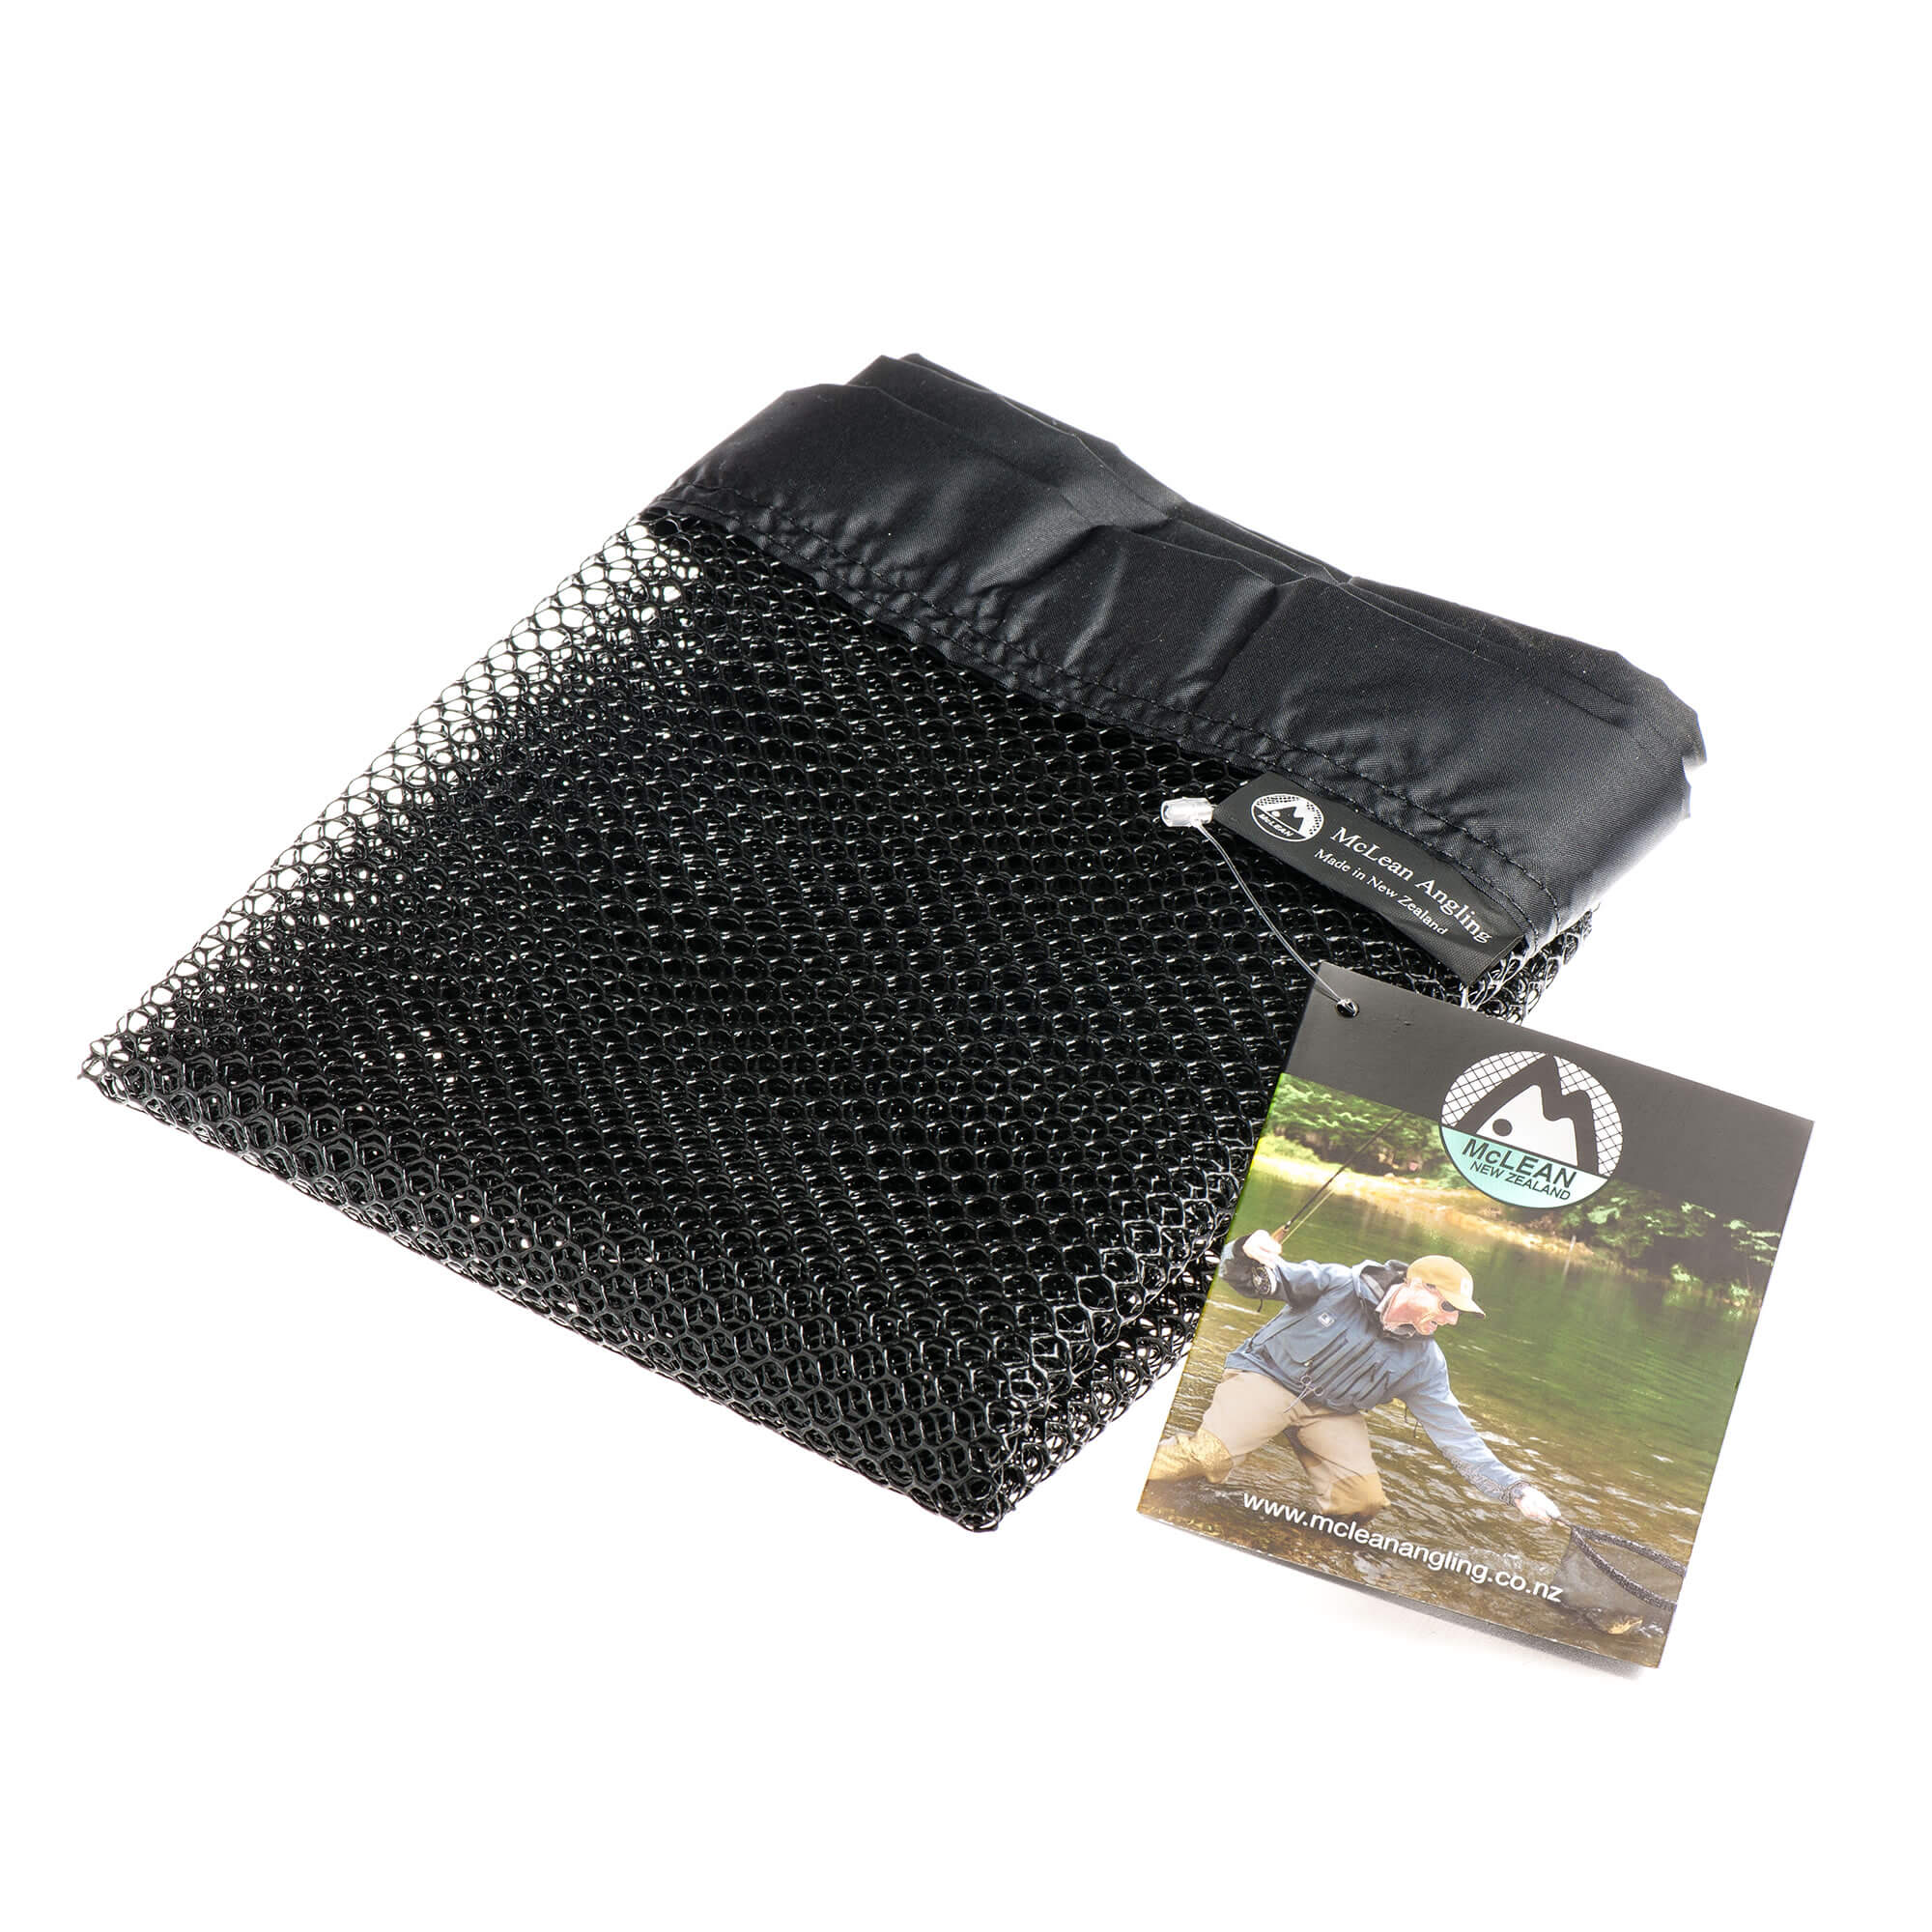 Mclean Replacement Micro Netbag (Medium/Large Trout Nets)